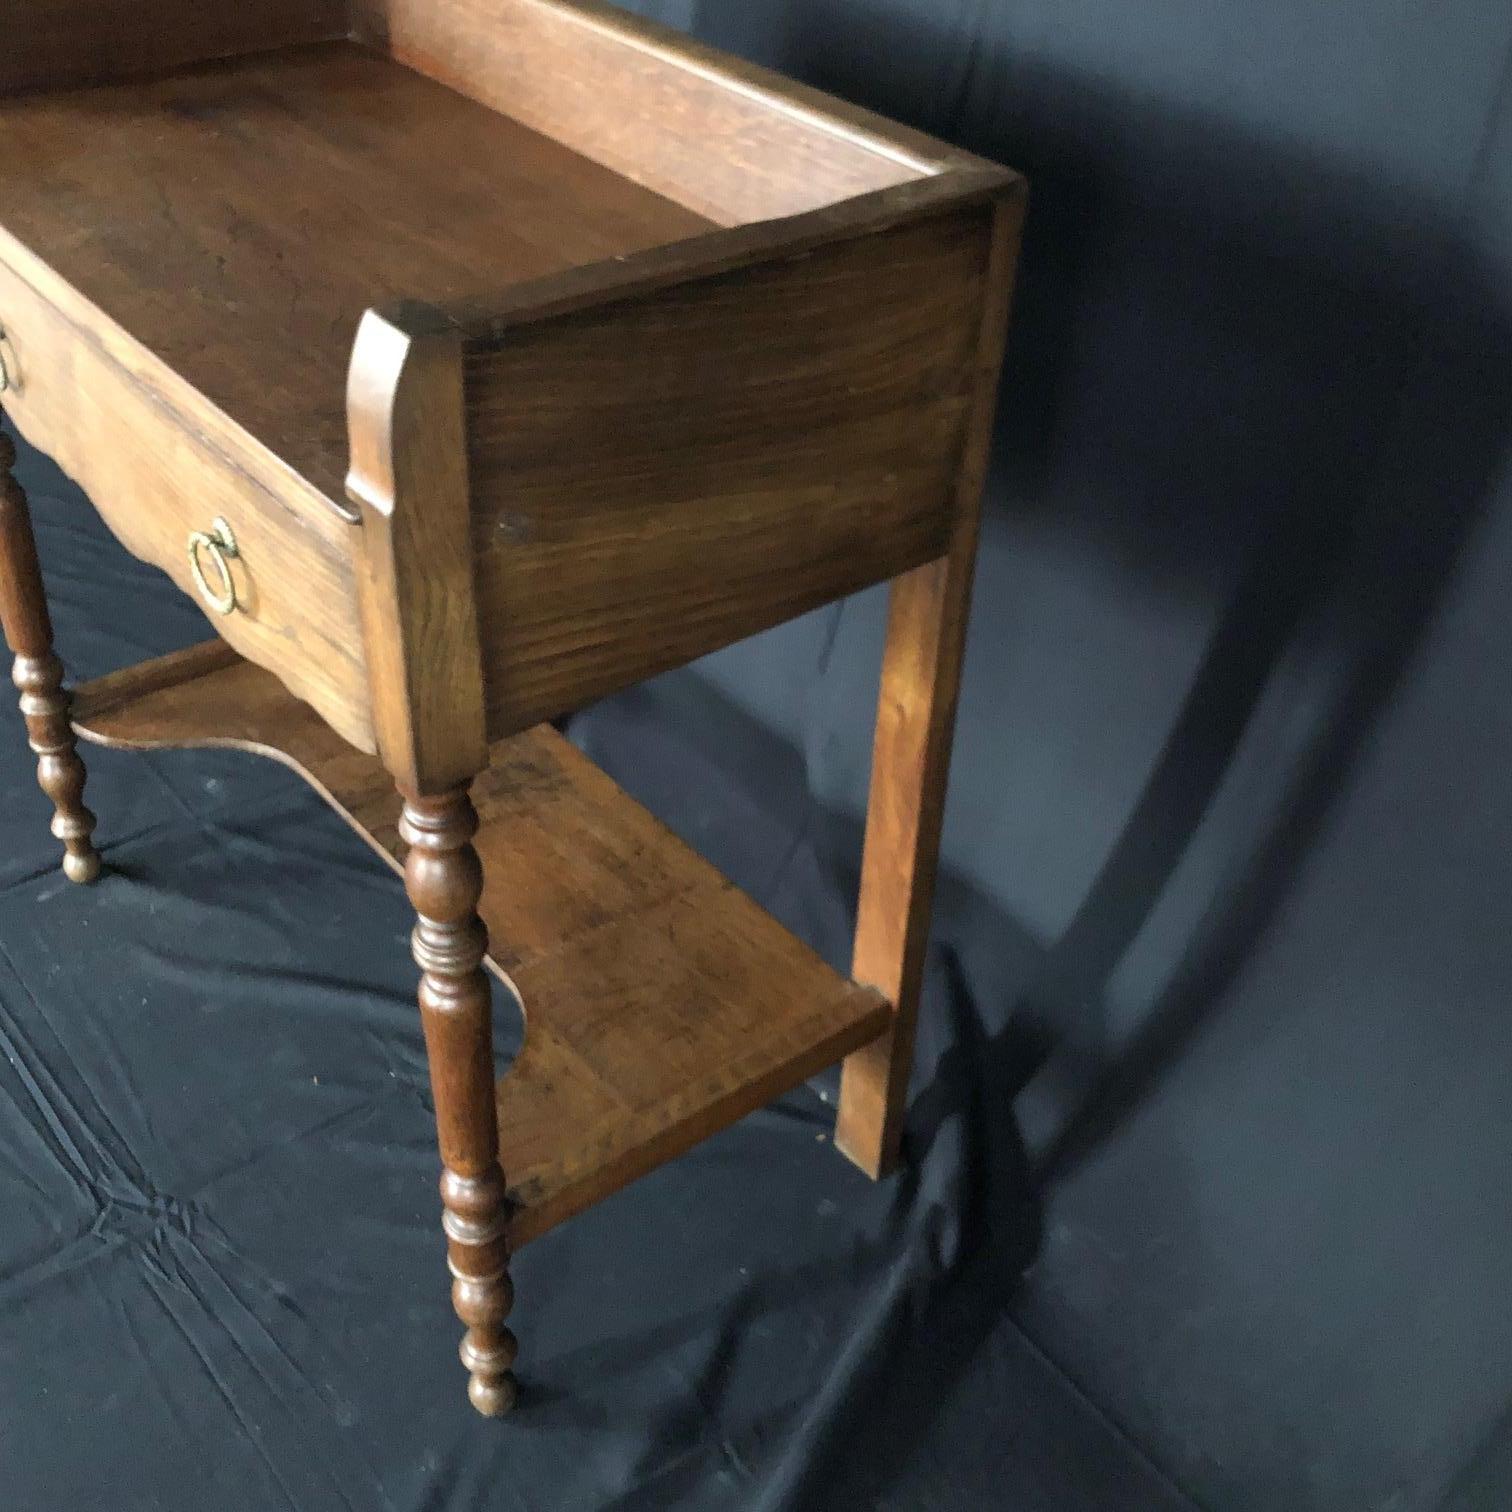 A French oak washstand having full length drawer with bronze pulls and beautifully turned front legs. The lower shelf has a shaped front. Hanging rod on the left side. Functional and beautiful! #5132

Measures: W 31” (28 without left hanging